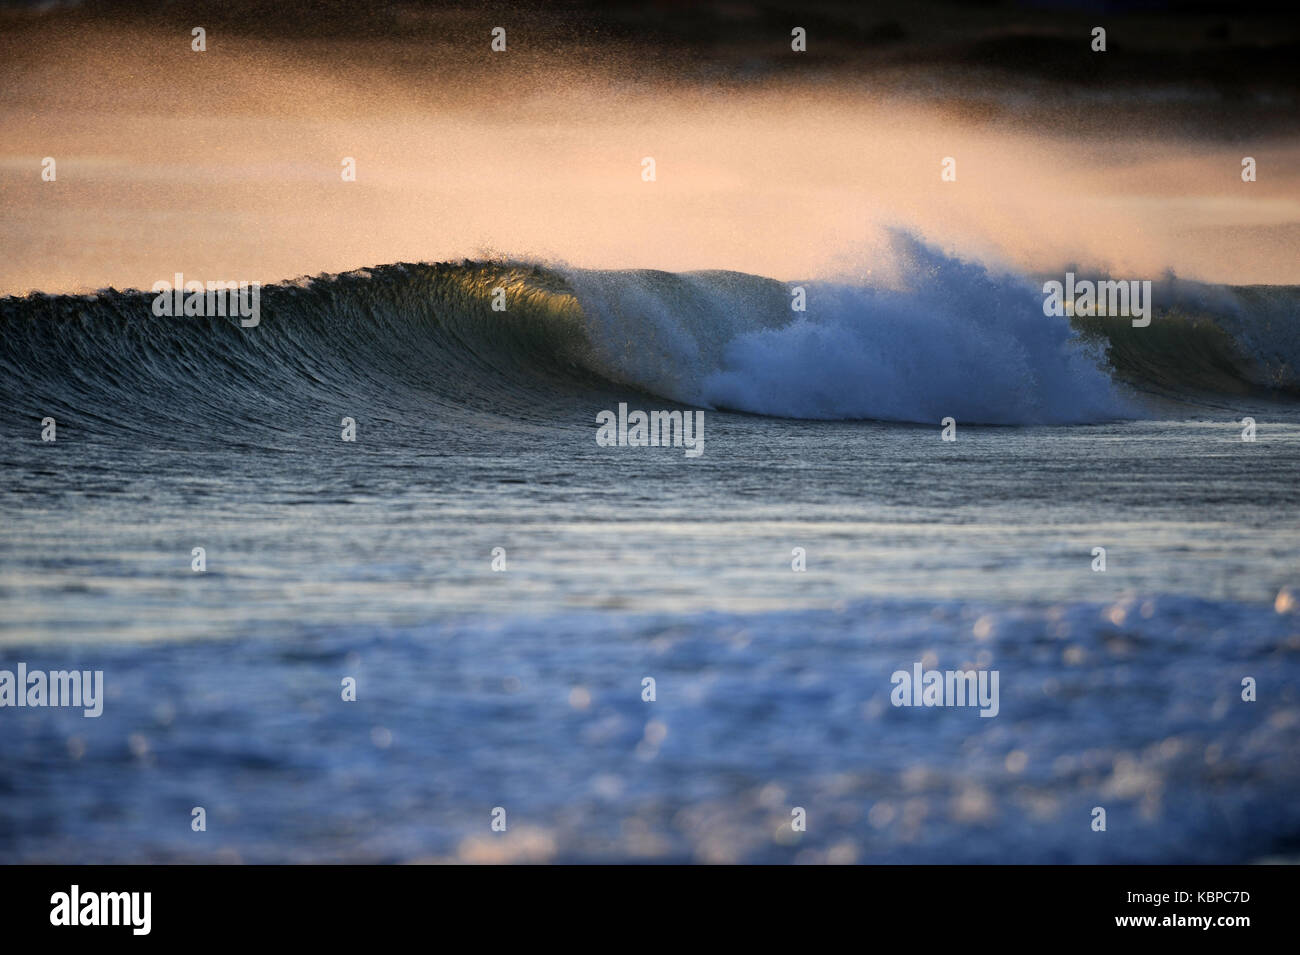 waves and surfing Stock Photo